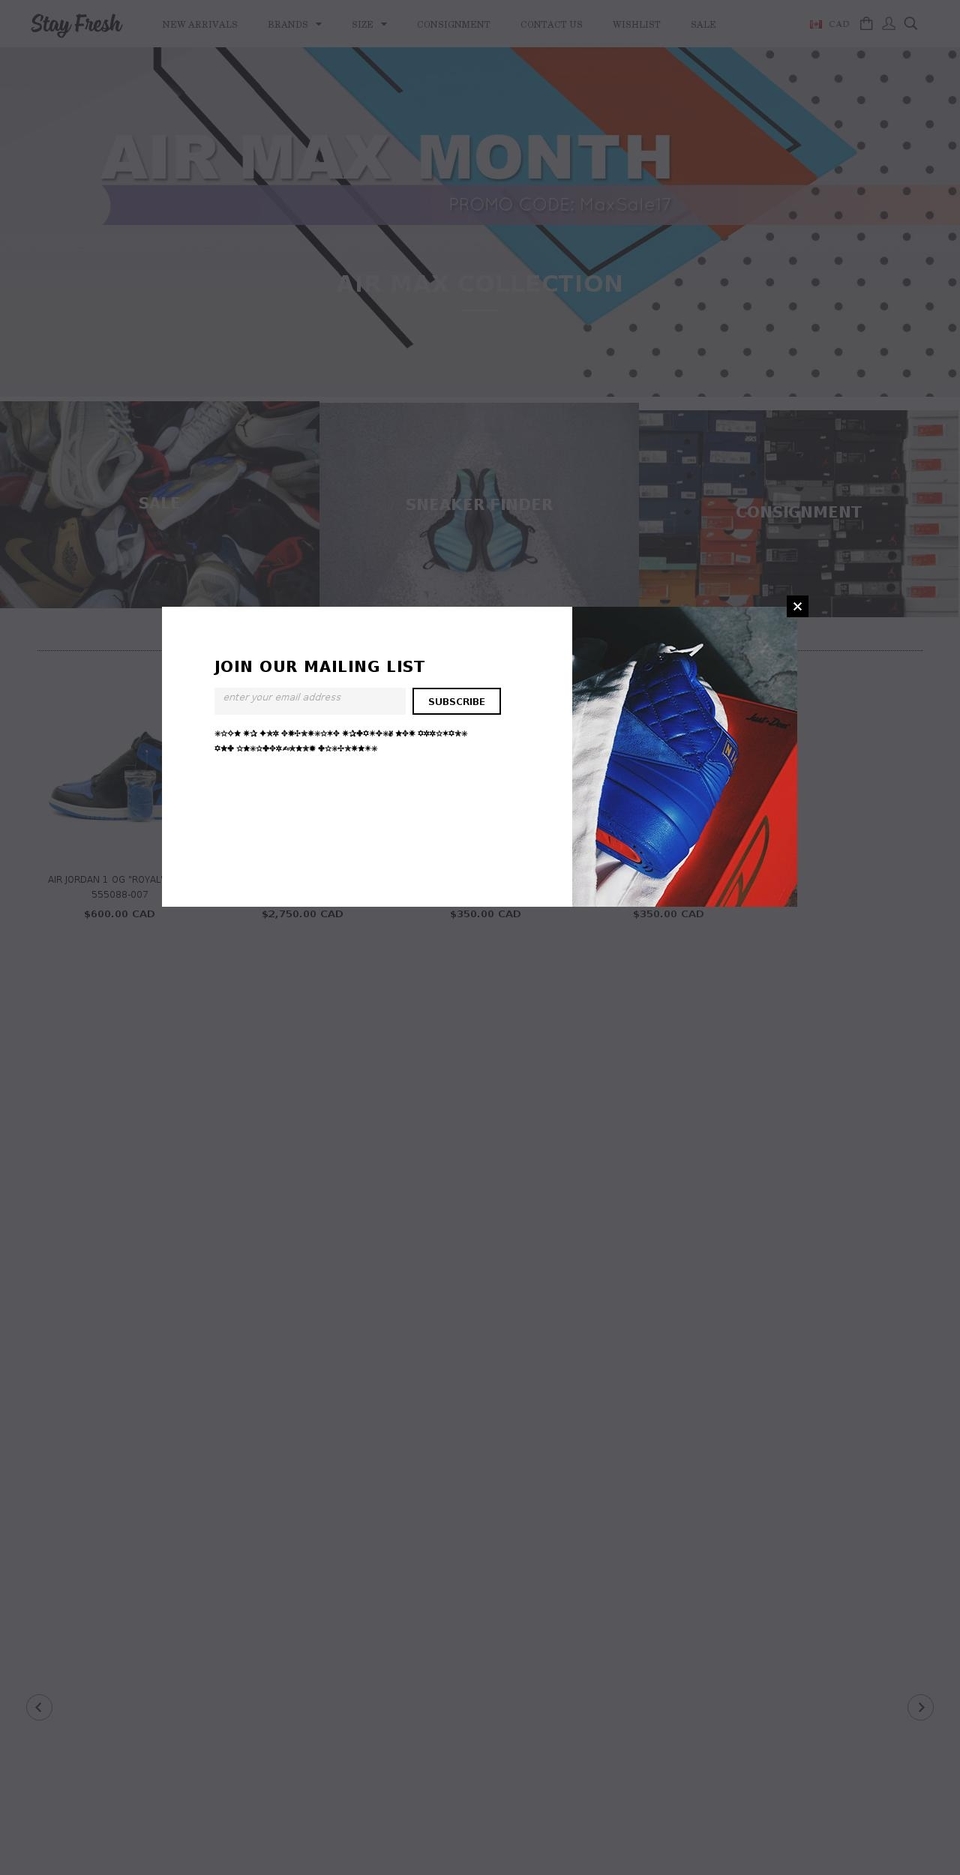 Parallax Shopify theme site example stayingfresh.ca